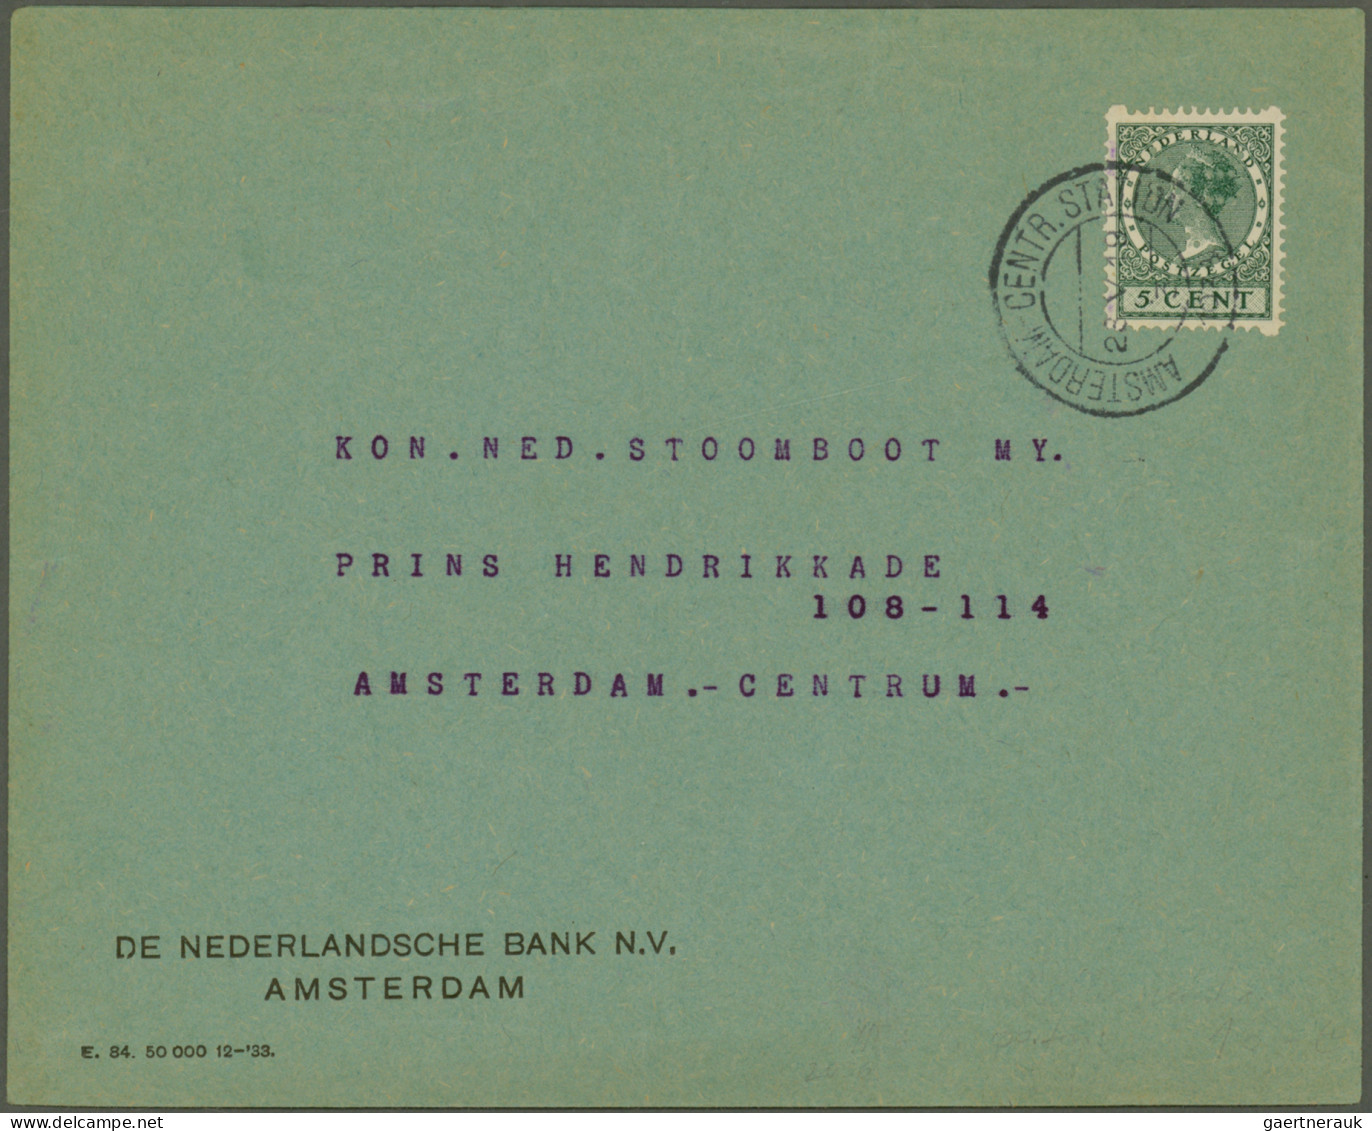 Netherlands: 1906/1984, assortment of apprx. 82 covers/cards, comprising e.g. at